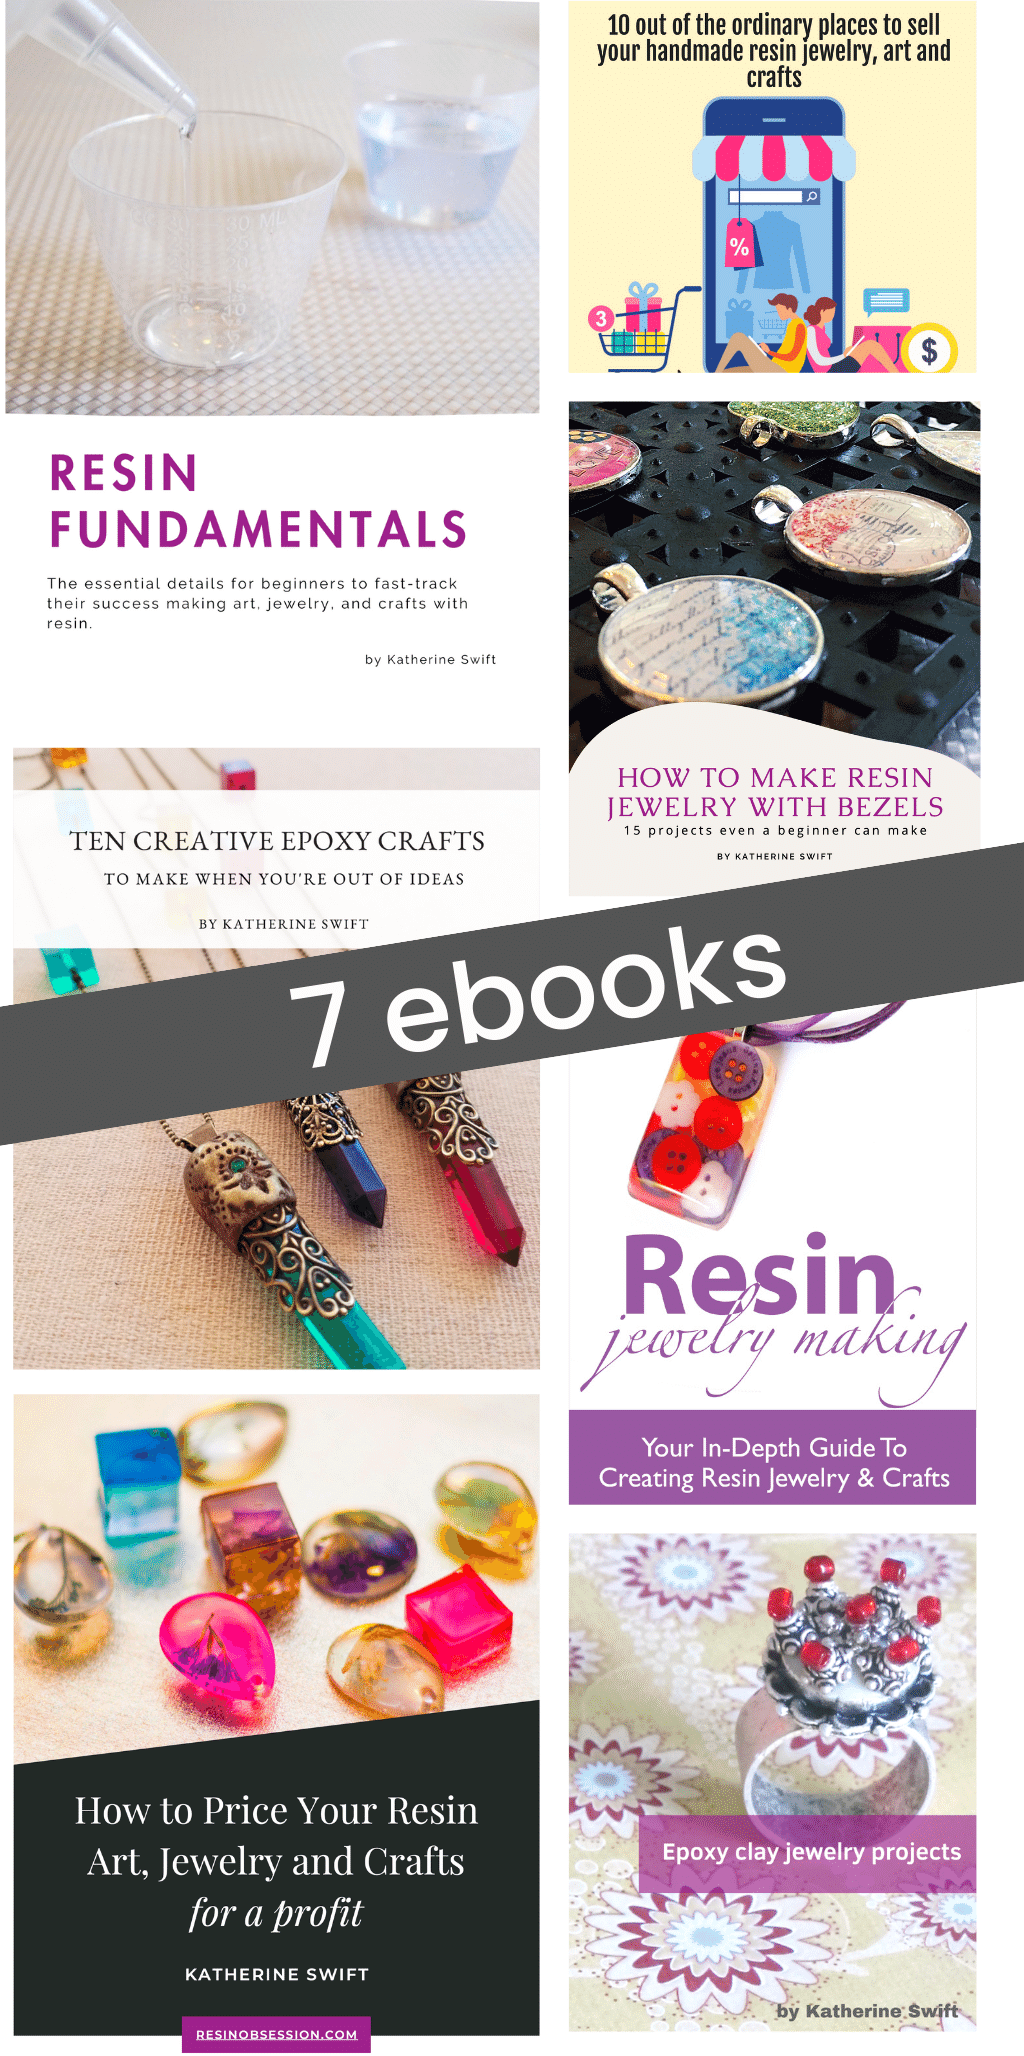 Book: Learn to Make Amazing Resin & Epoxy Clay Jewelry Book 